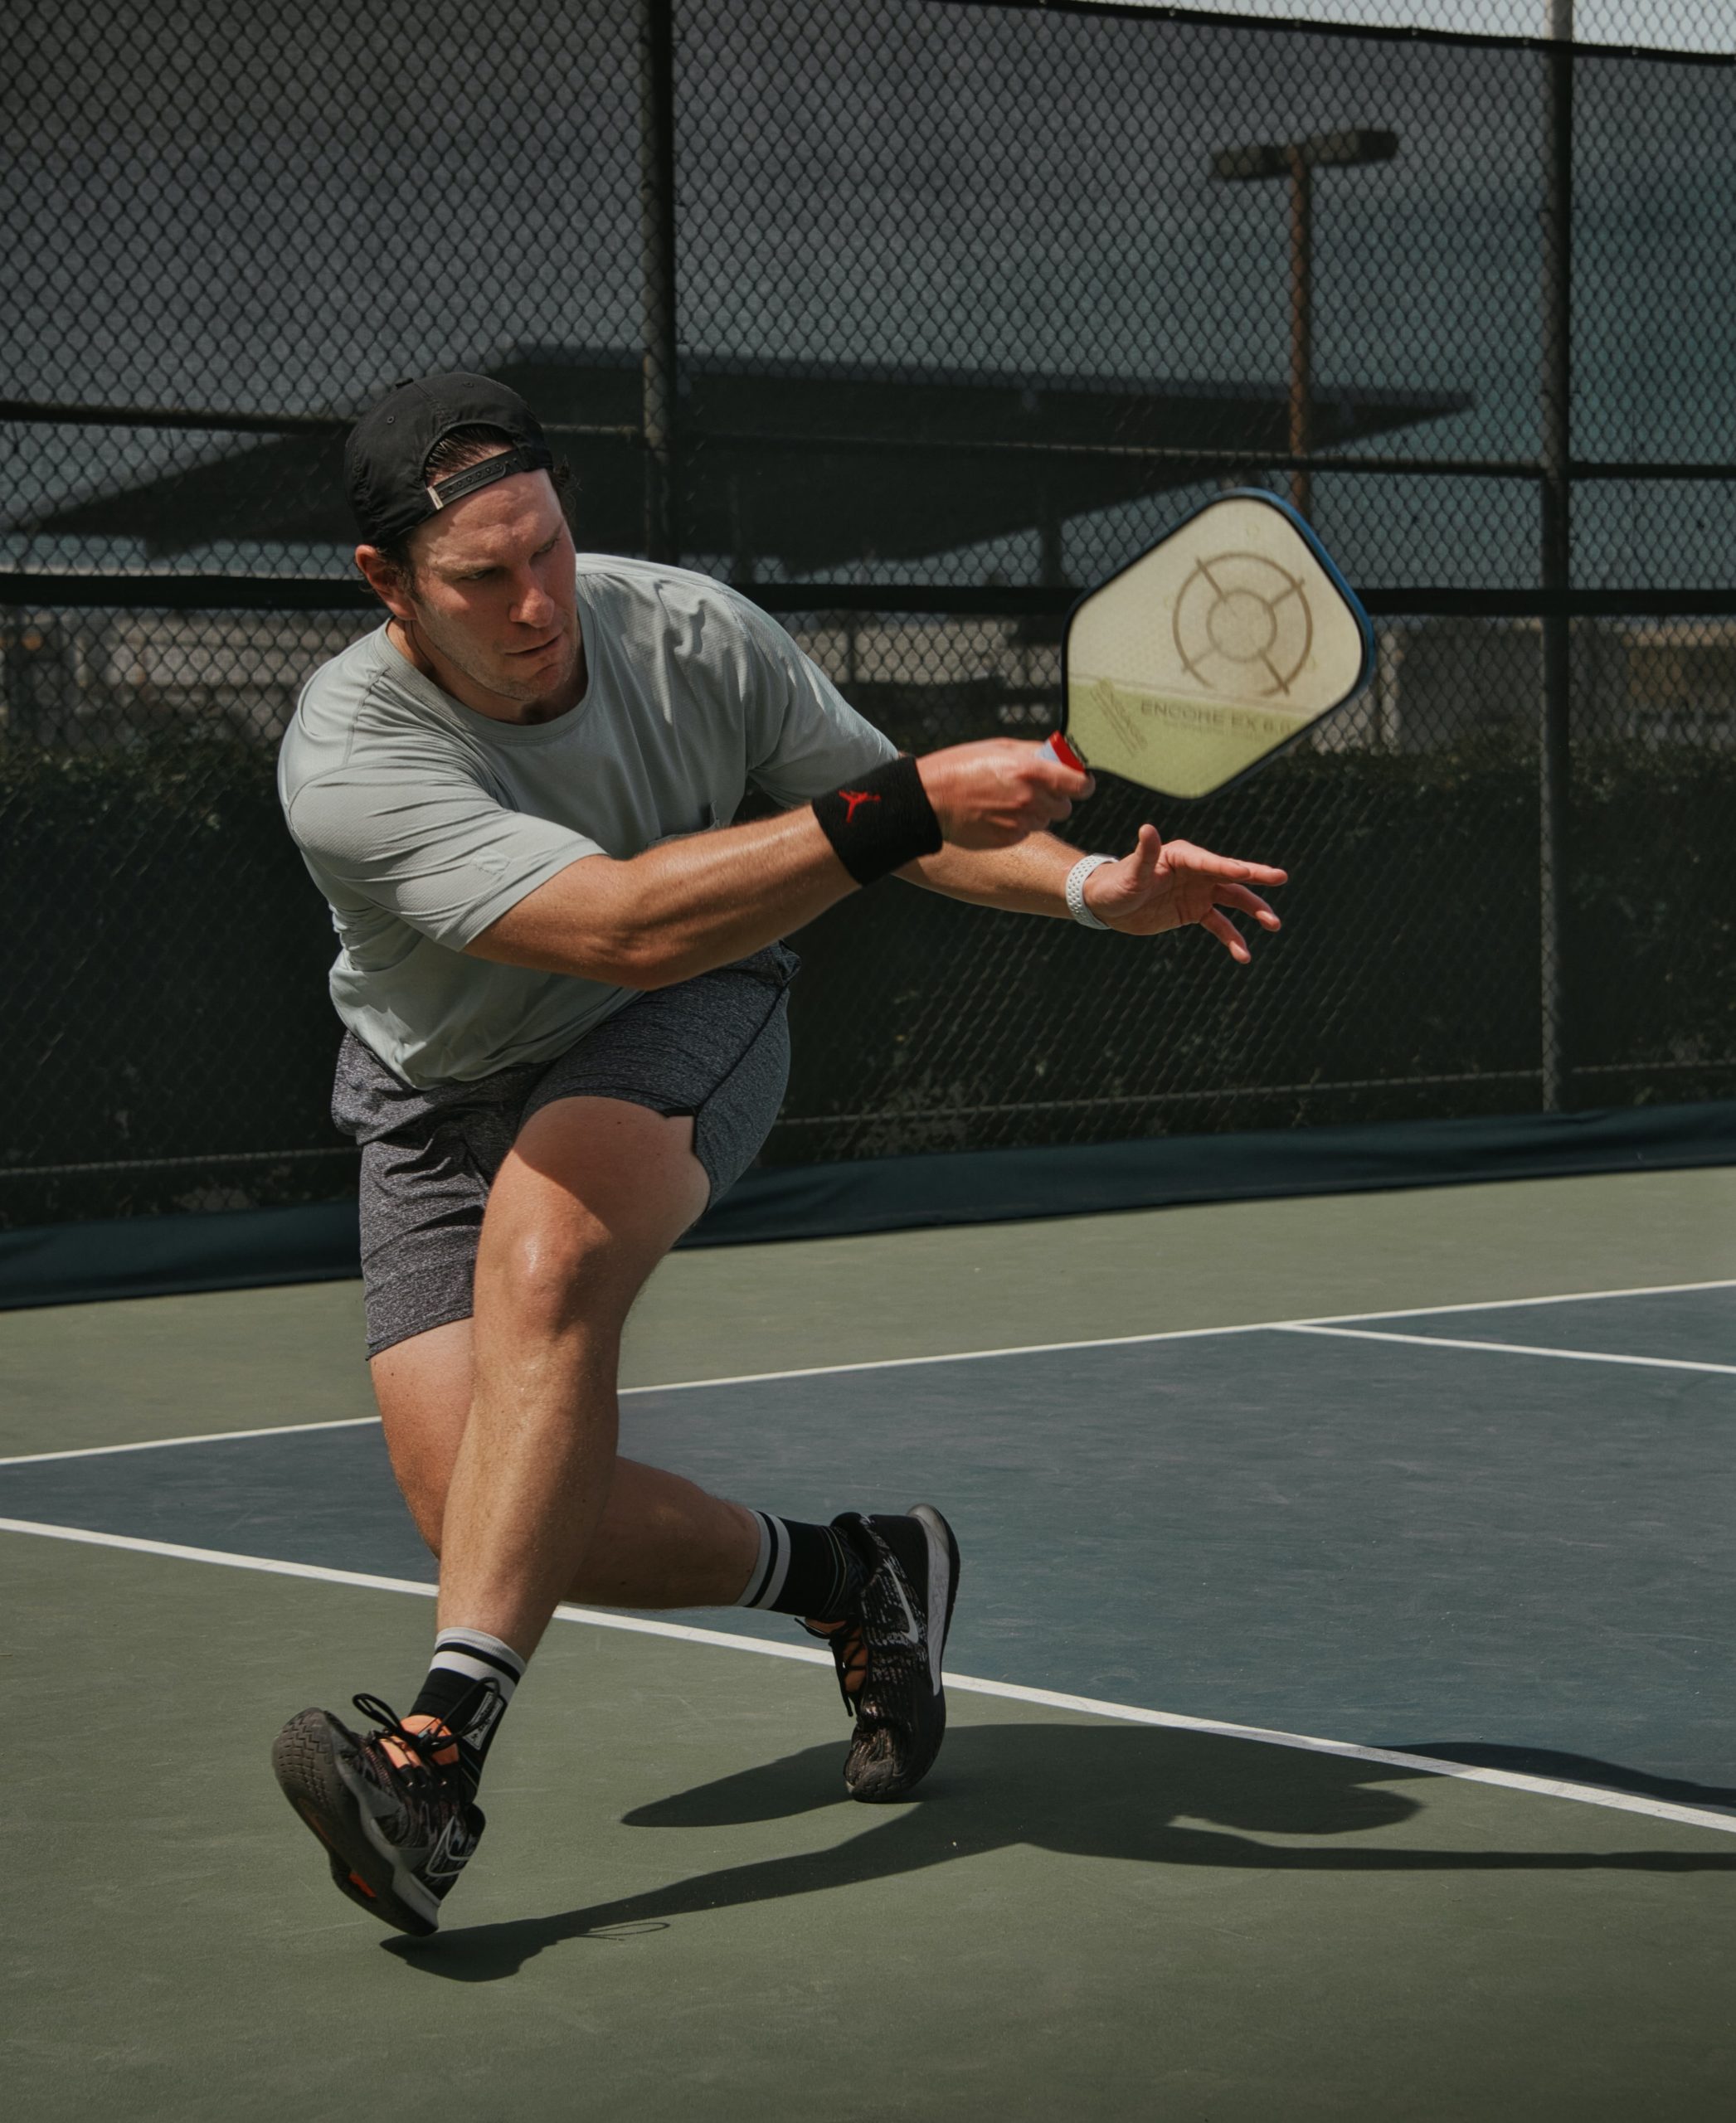 Best Pickleball Gear Reviews Website Launched